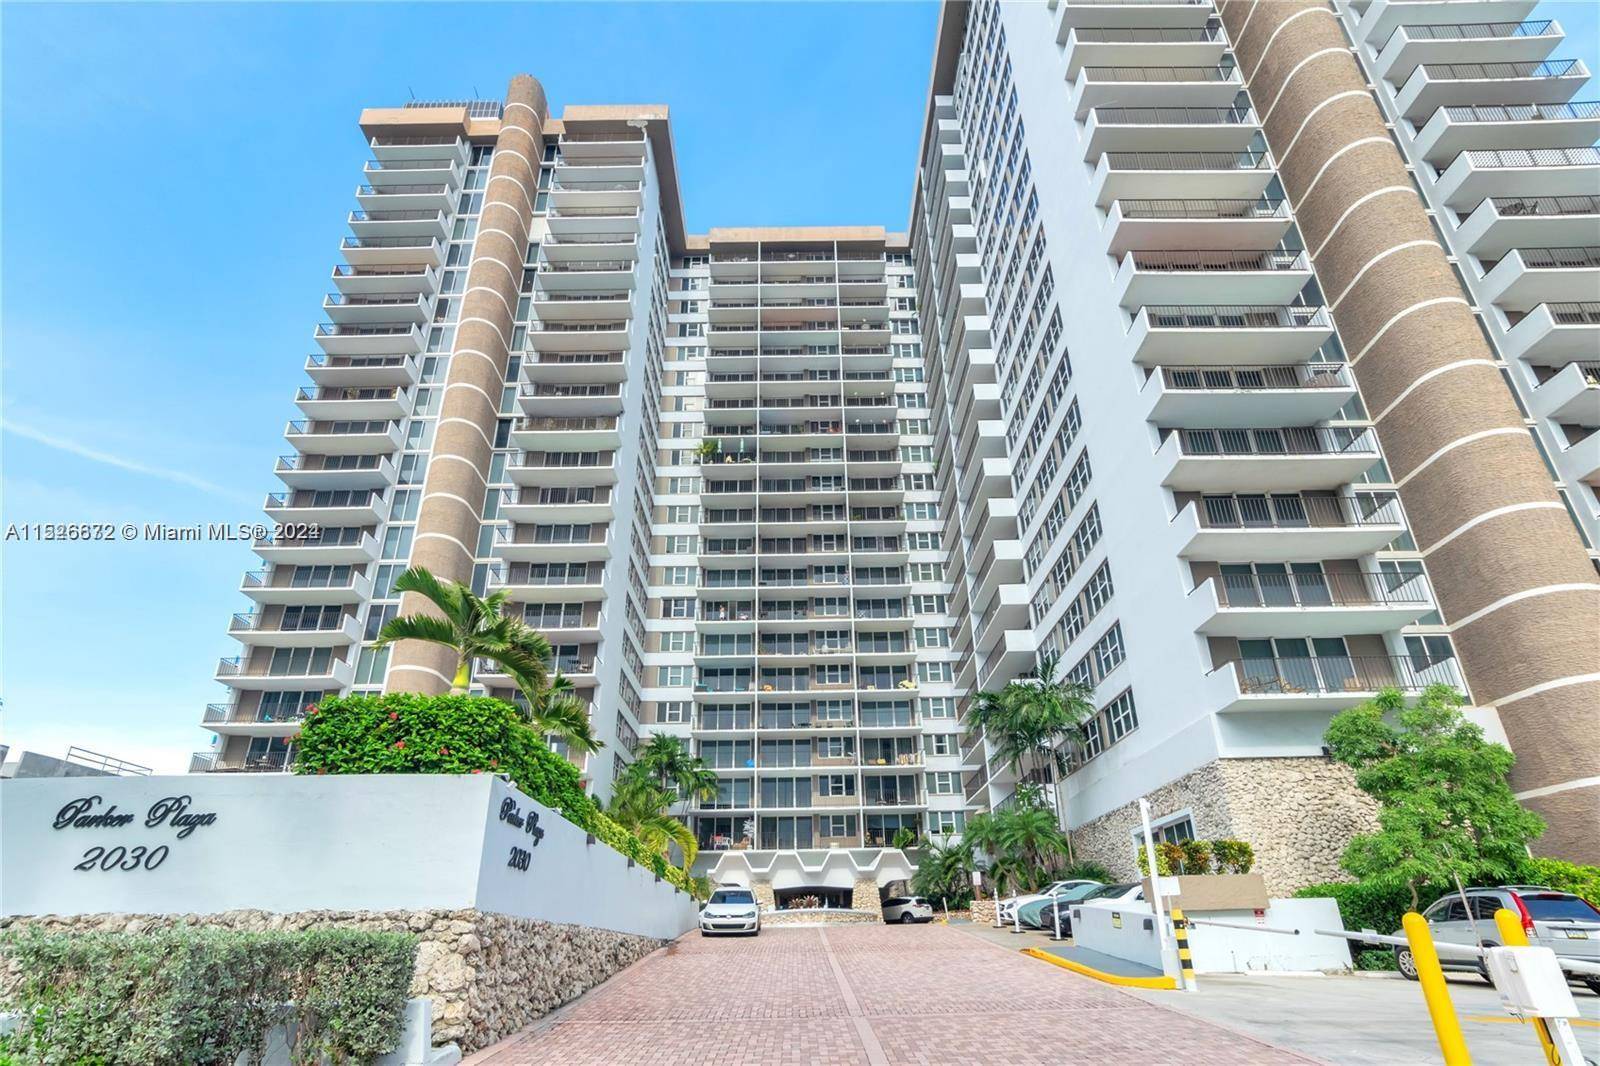 PRICED TO SELL ! BEAUTIFUL PENTHOUSE UNIT WITH 2 BED AND 2 BATHS AT AN OCEANFRONT BUILDING WITH INTRACOASTAL AND CITY VIEWS.